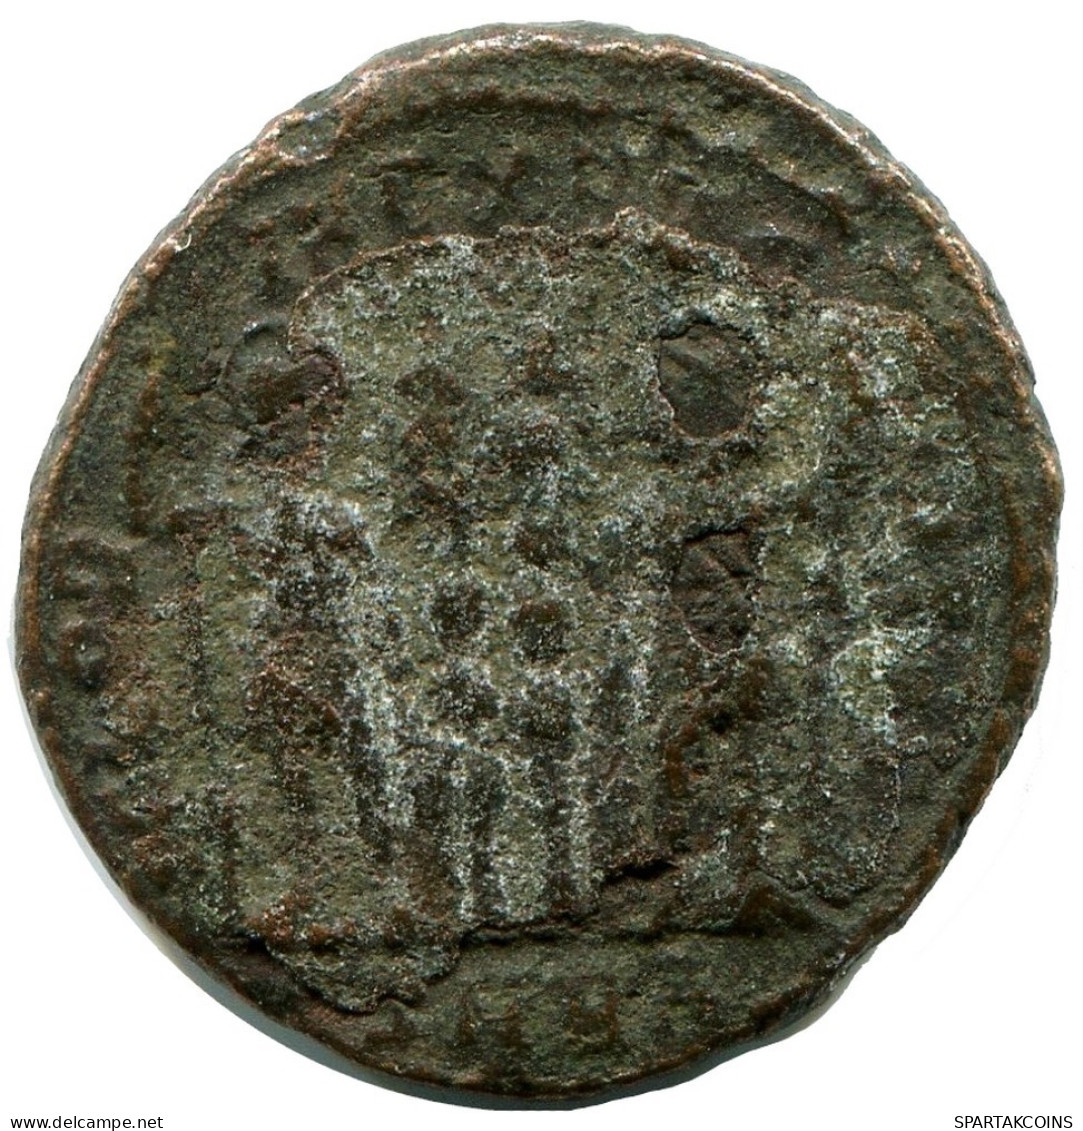 CONSTANTINE I MINTED IN HERACLEA FROM THE ROYAL ONTARIO MUSEUM #ANC11207.14.U.A - The Christian Empire (307 AD Tot 363 AD)